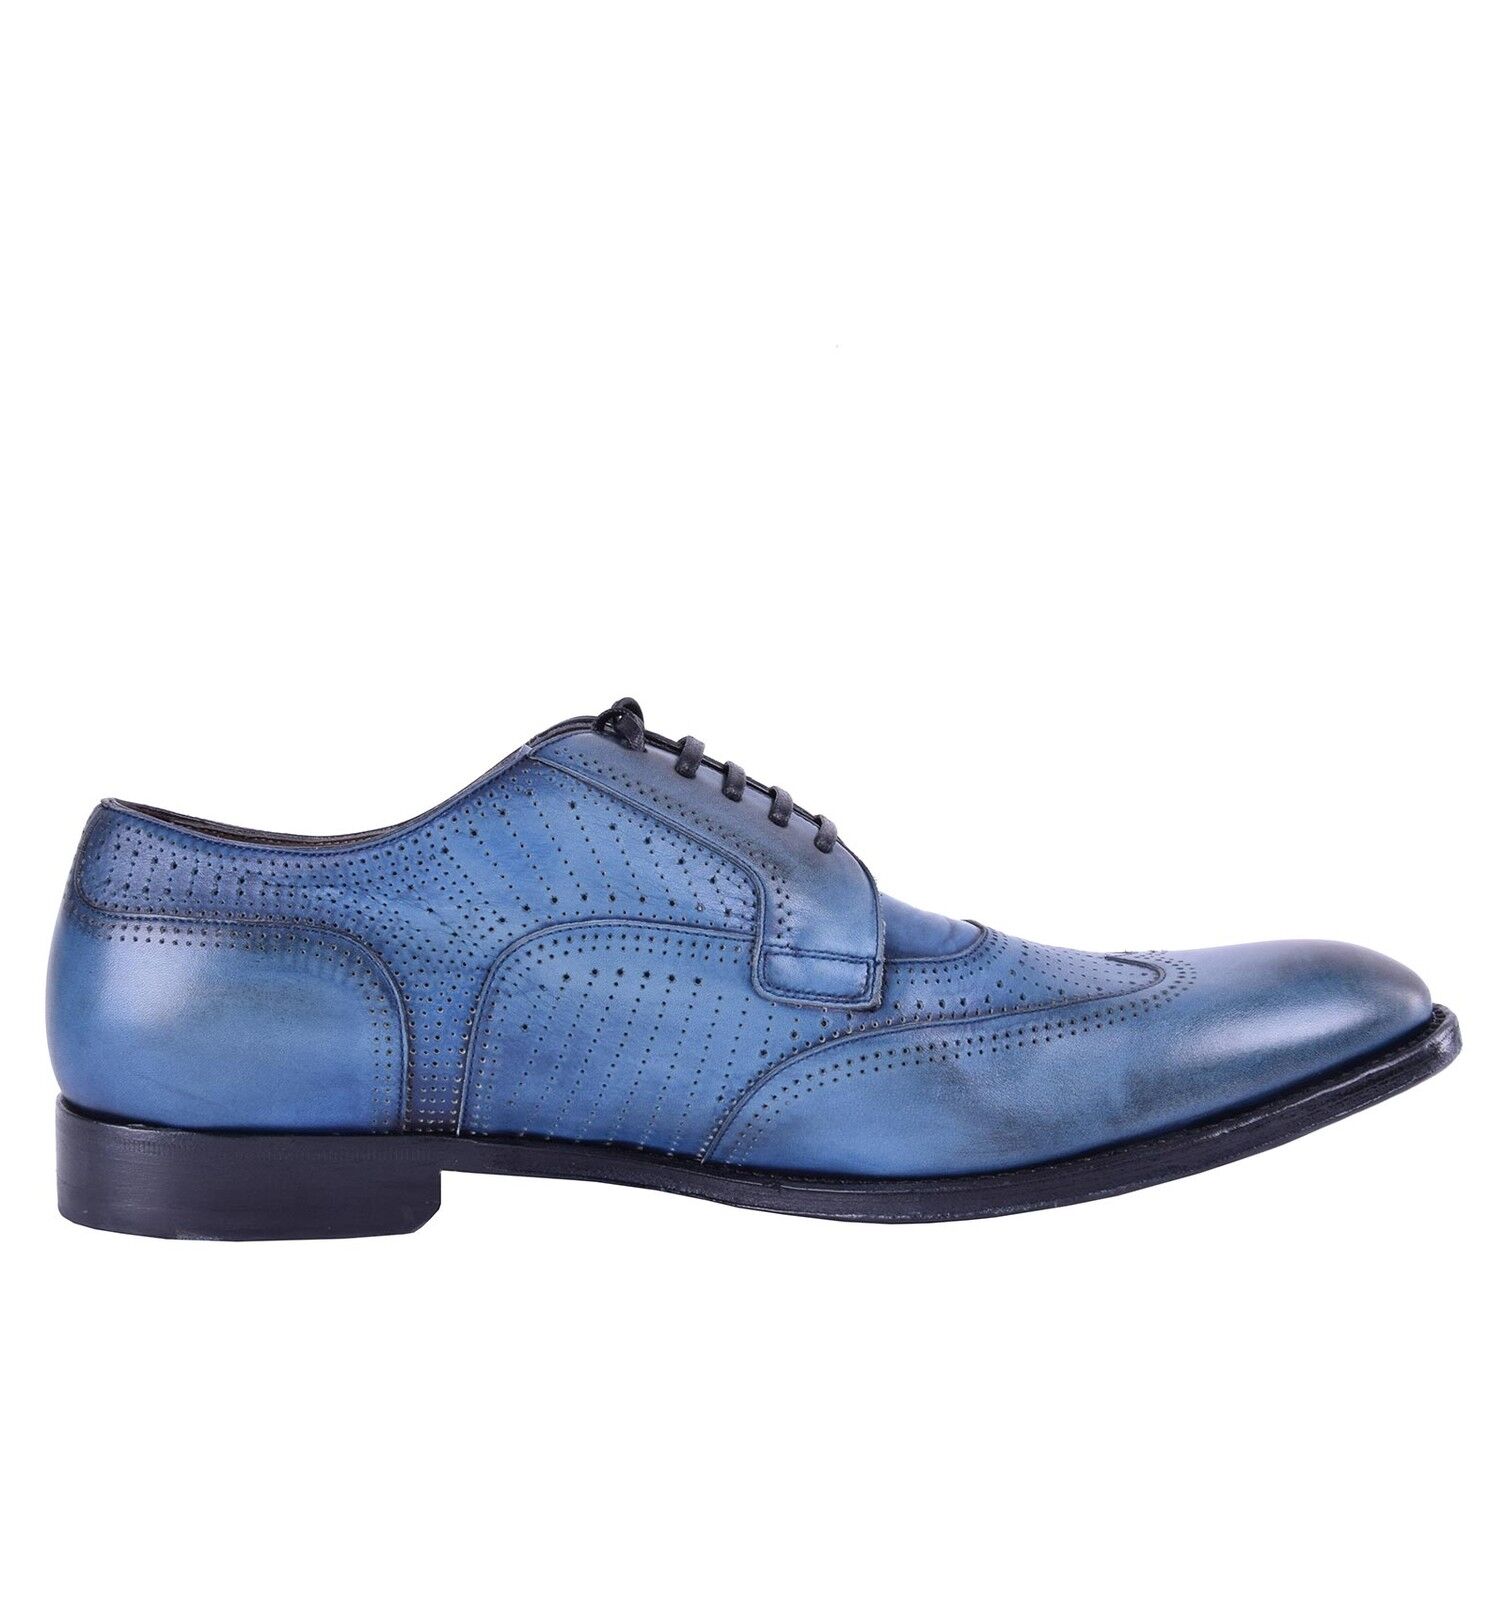 Pre-owned Dolce & Gabbana Perforated Calfskin Derby Shoes "naples" Blue 04655